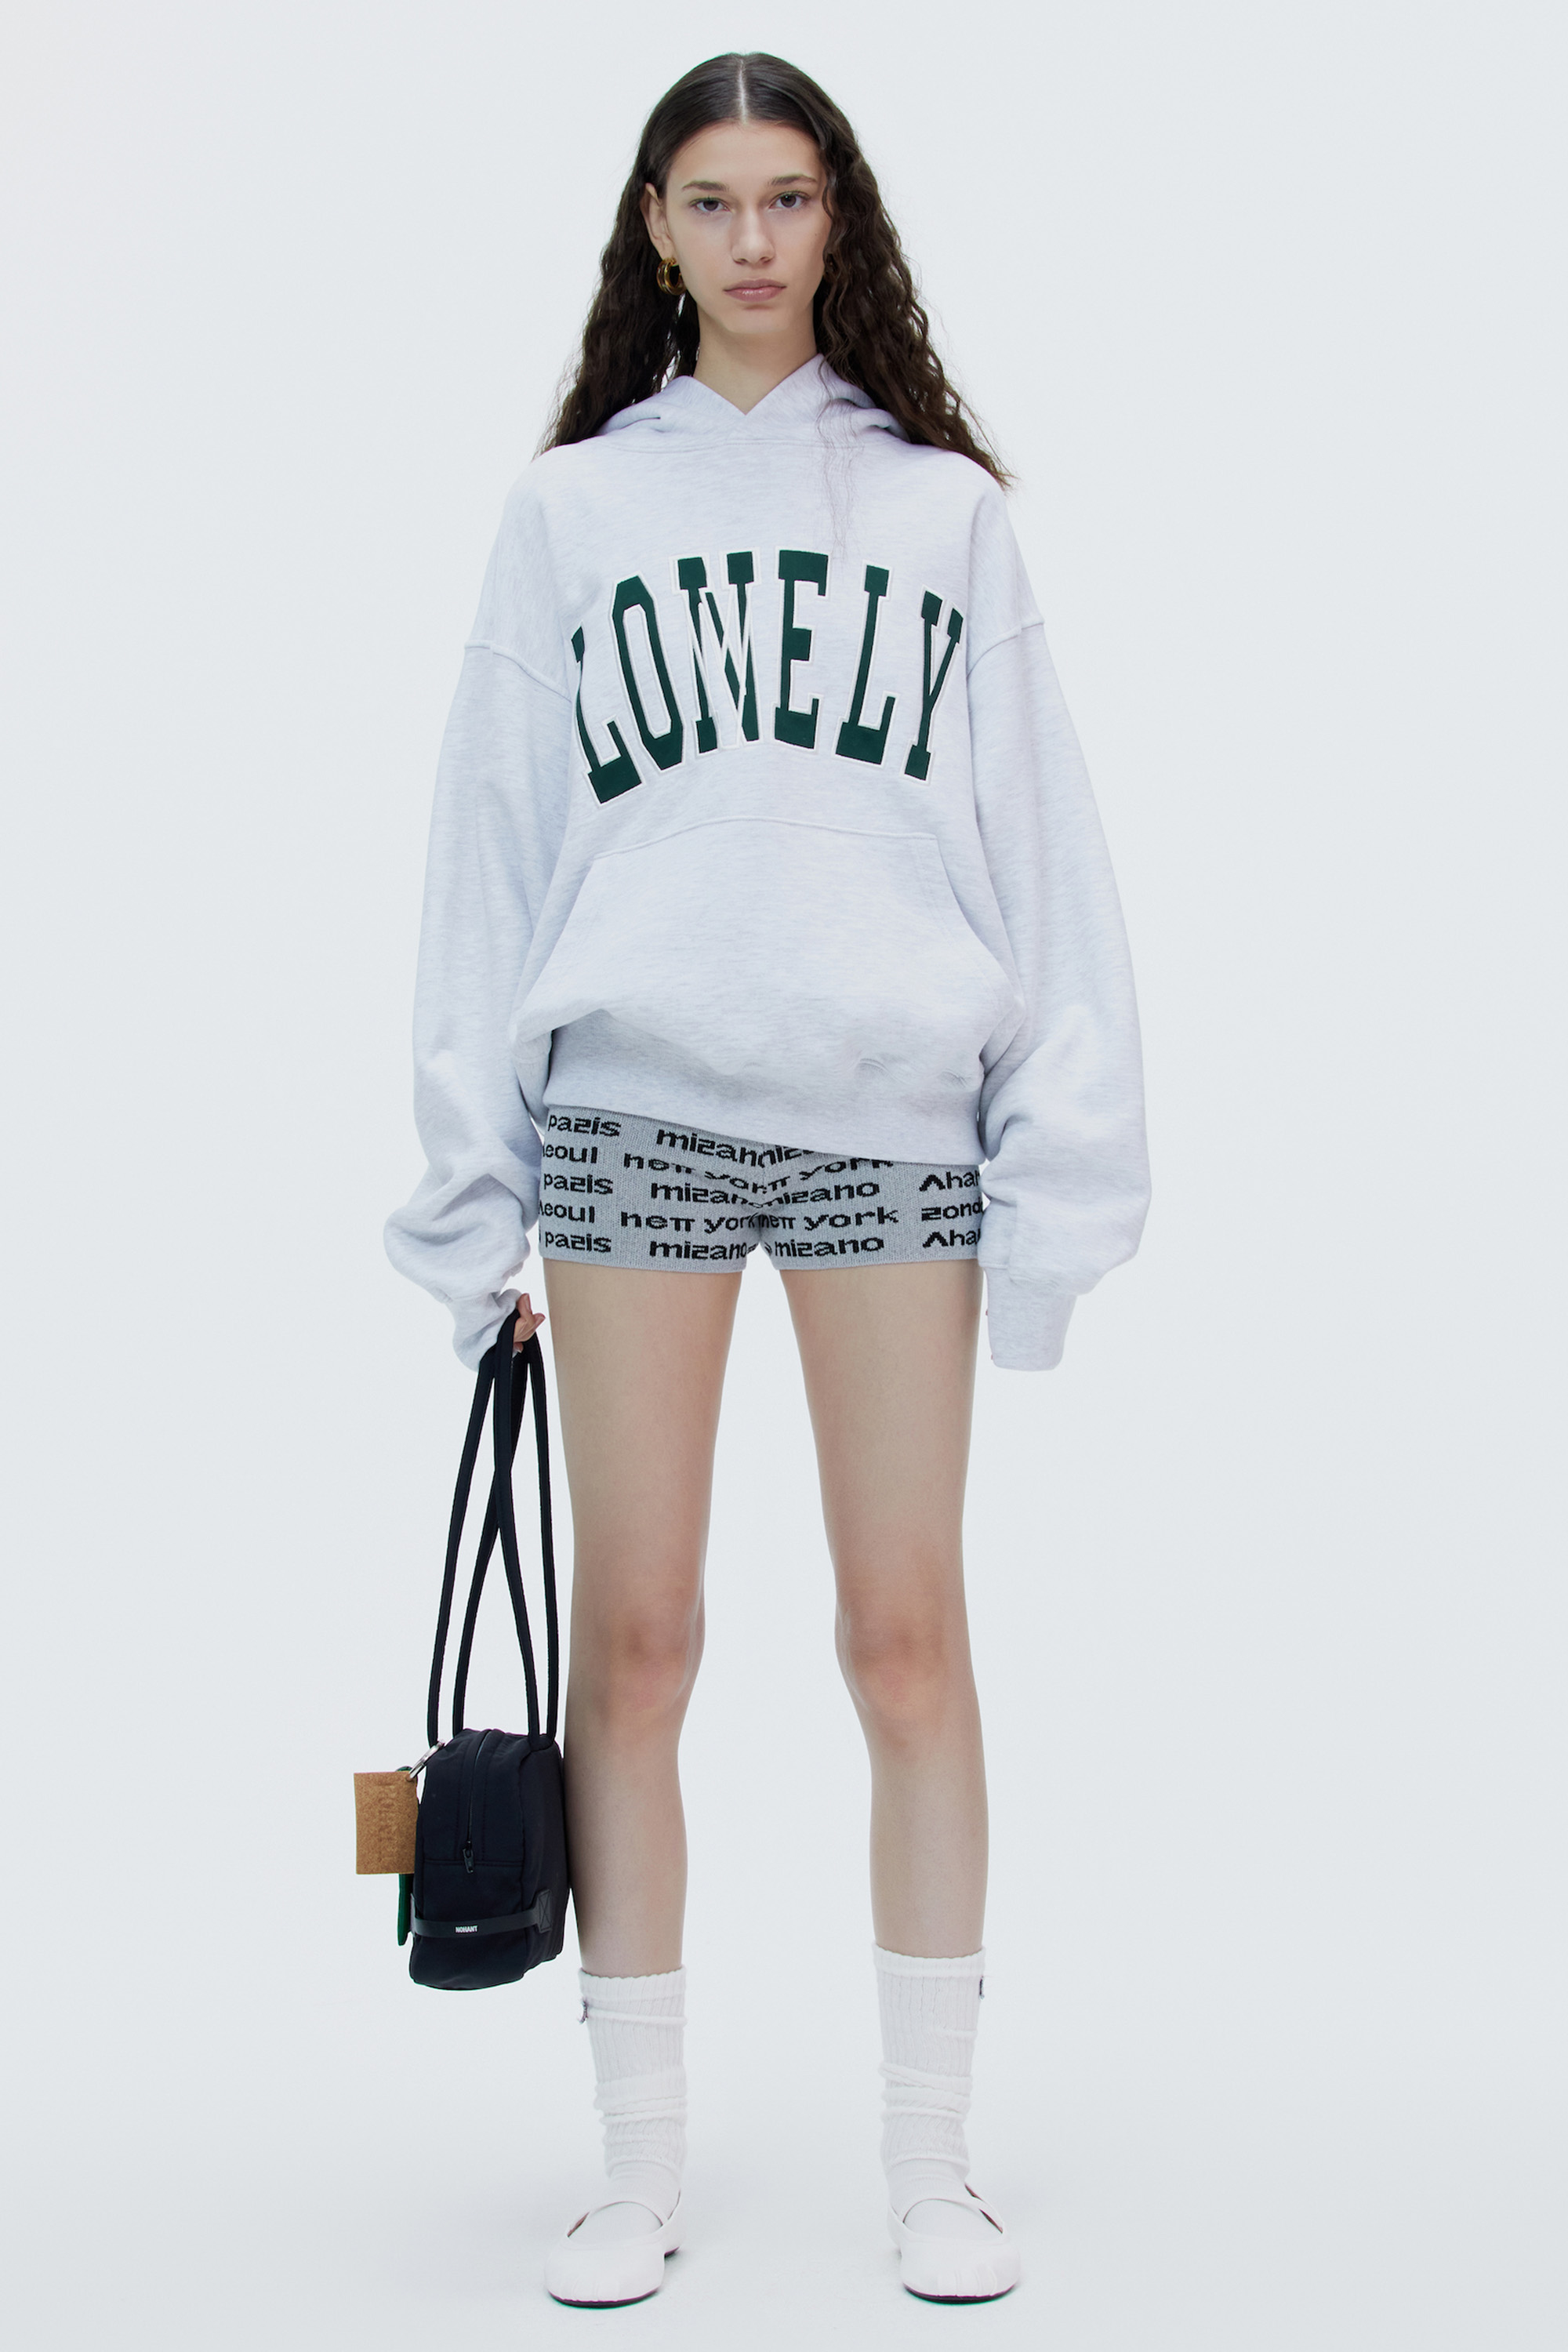 LONELY/LOVELY HOODIE